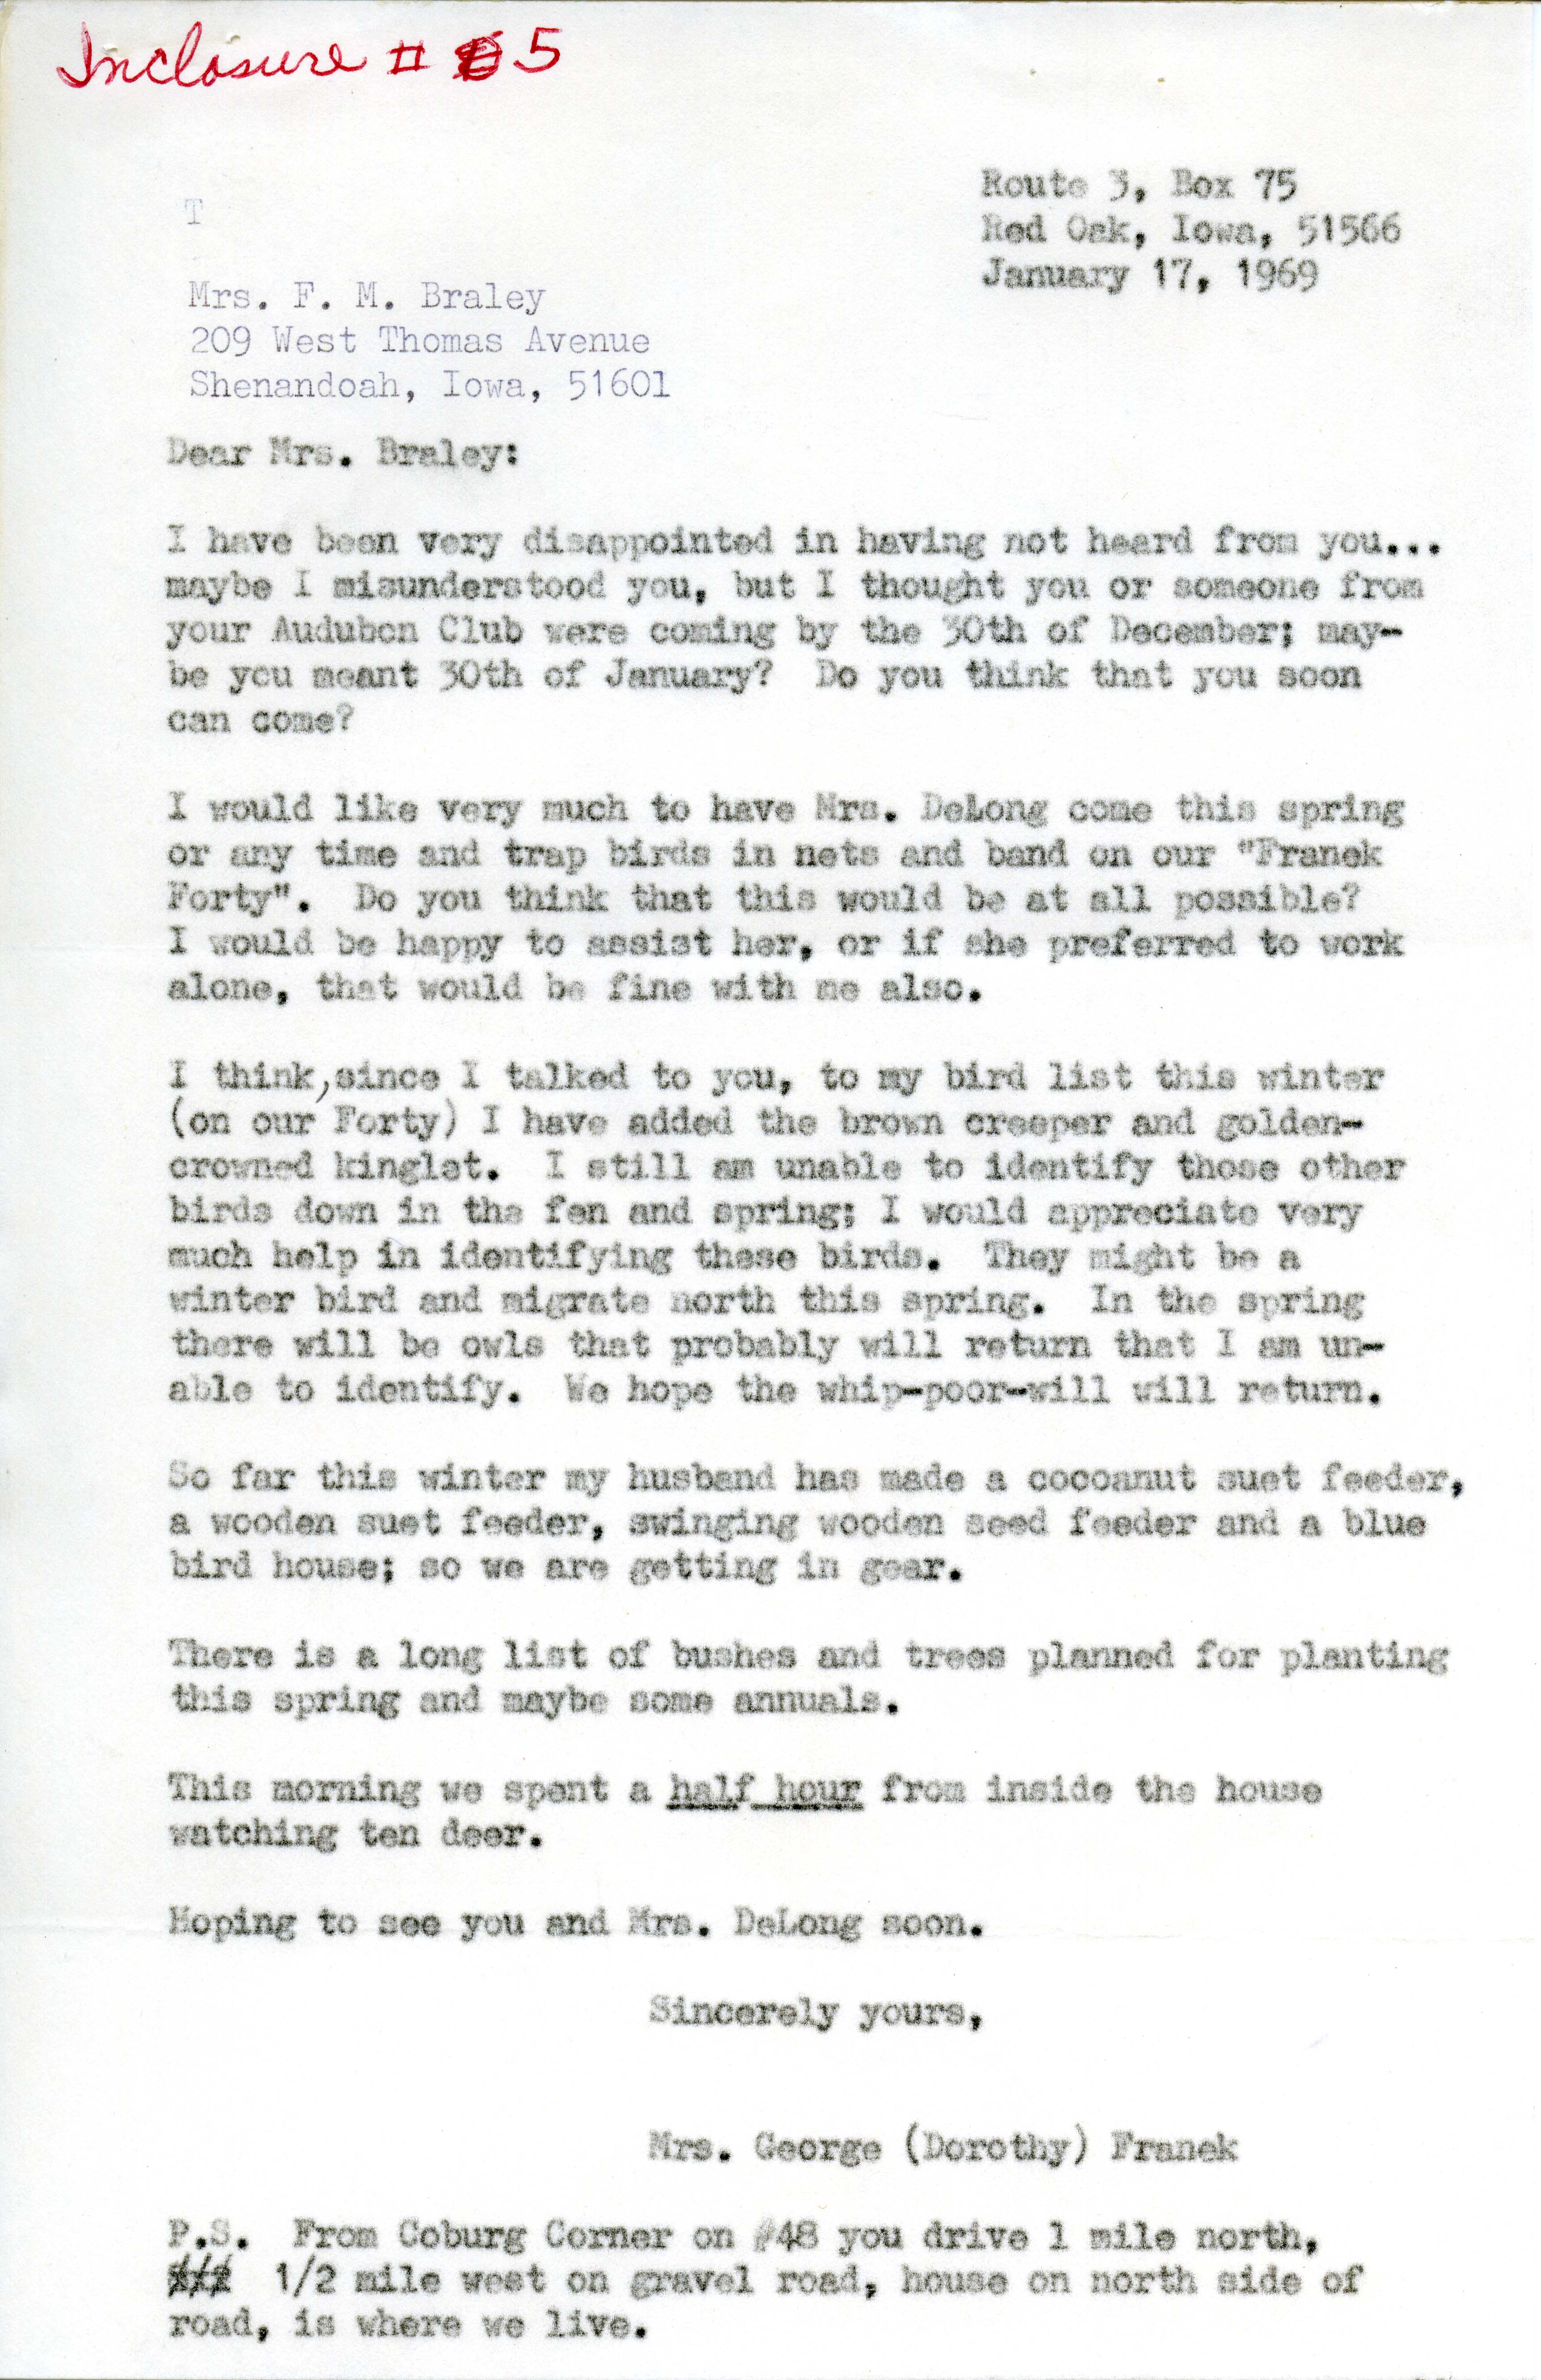 Dorothy Franek letter to Frances Braley regarding her activities with birds, January 17, 1969